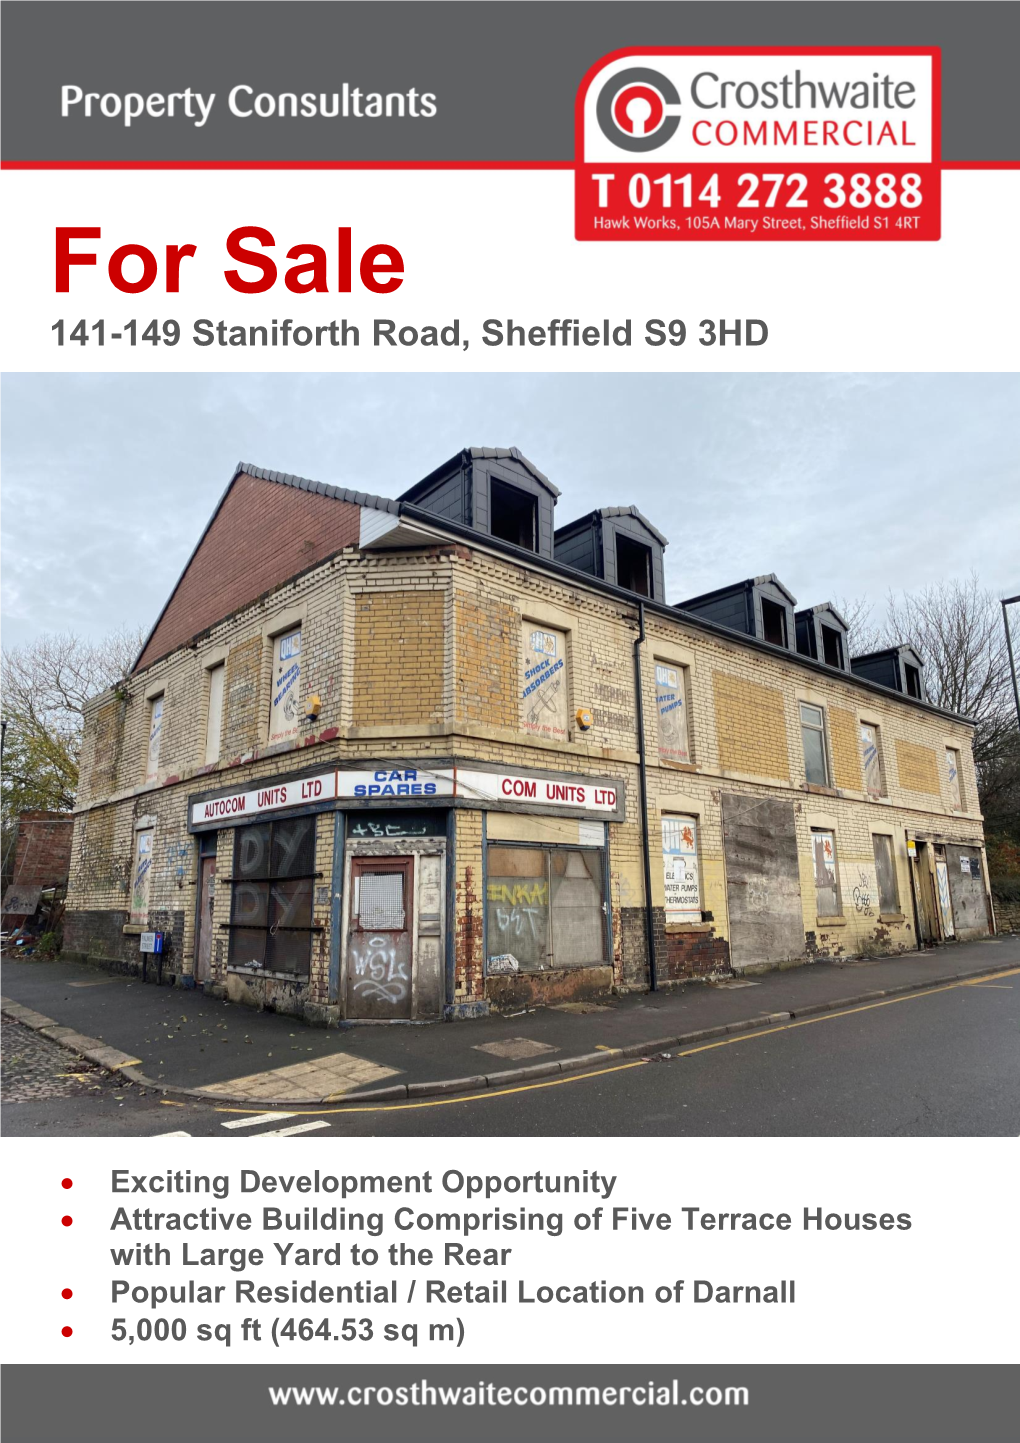 For Sale 141-149 Staniforth Road, Sheffield S9 3HD